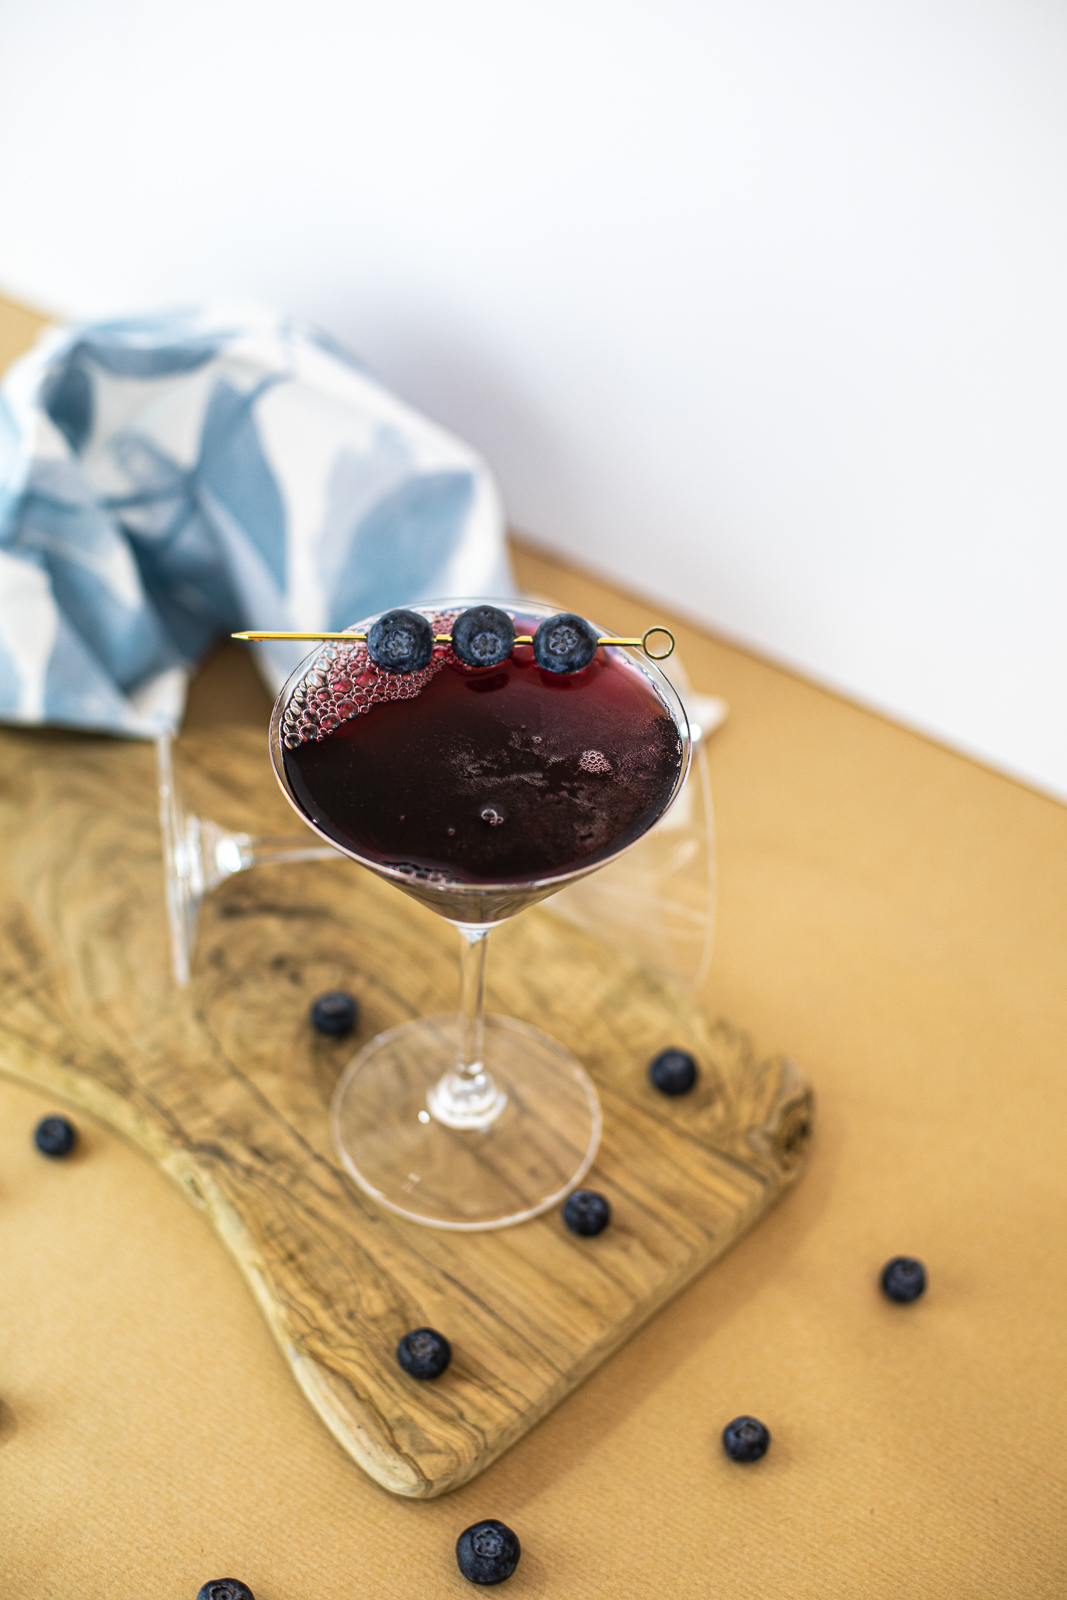 Abovew view of cocktail with three blueberries as garnish on golden stick. 